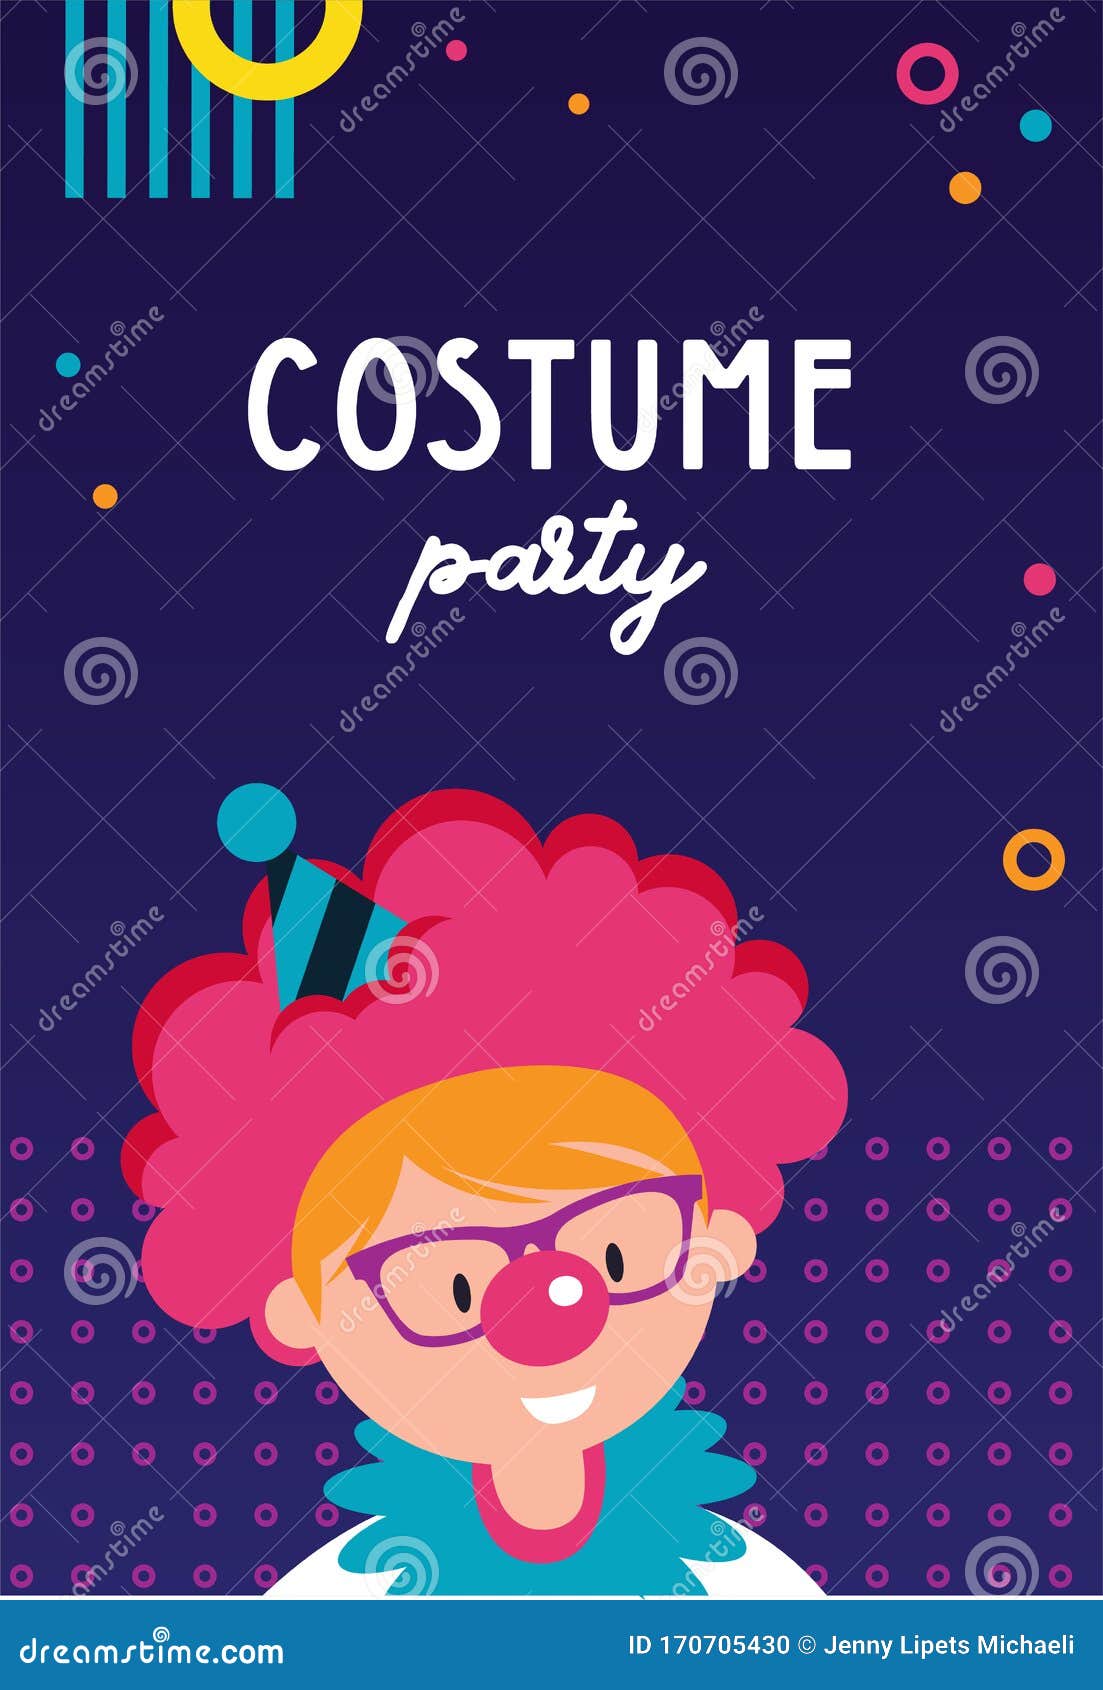 Carnival Birthday Invitations Template from thumbs.dreamstime.com